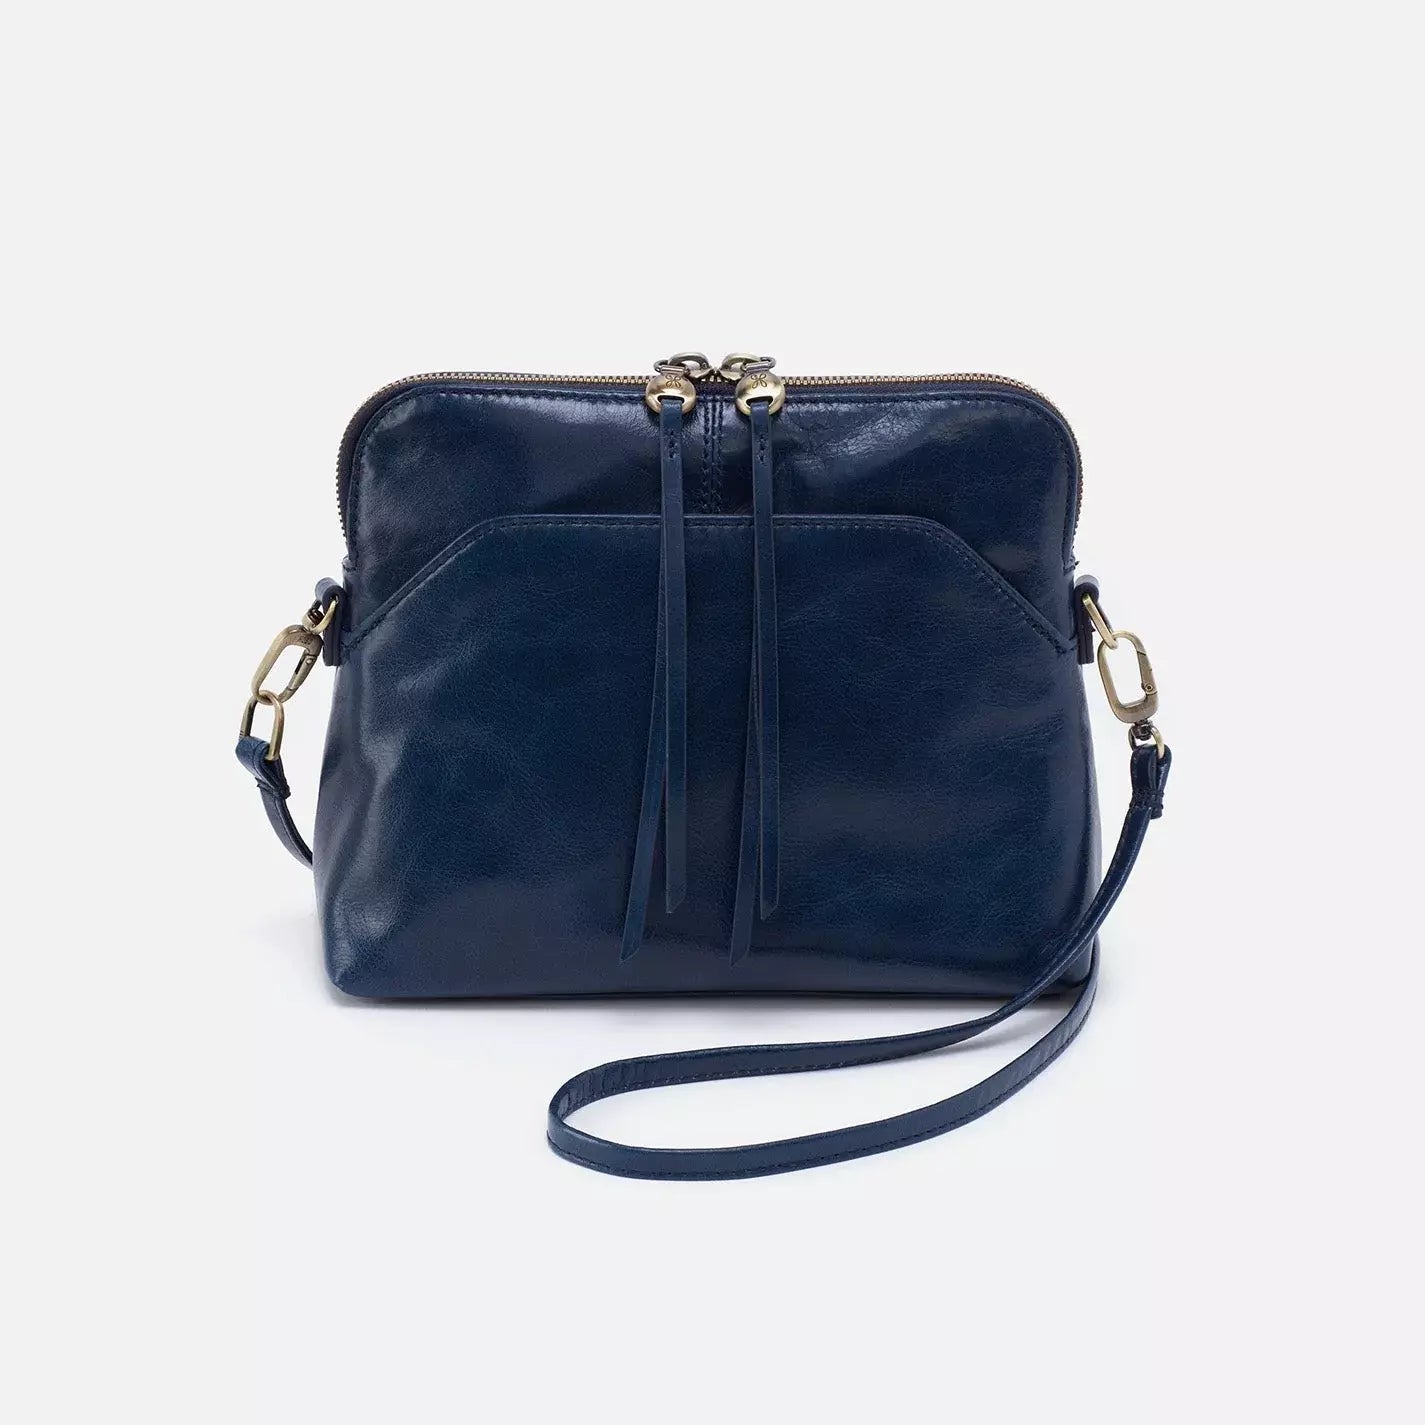 The Reeva crossbody in denim blue by HOBO is perfect for everything from mornings at the coffeeshop to happy hour with friends. Adjust the strap to wear as a crossbody, short shoulder or wristlet for three looks in one! Crafted in our Vintage Hide leather that only gets more beautiful over time with use and wear. Check it out at the Painted Cottage in Edgewater, MD